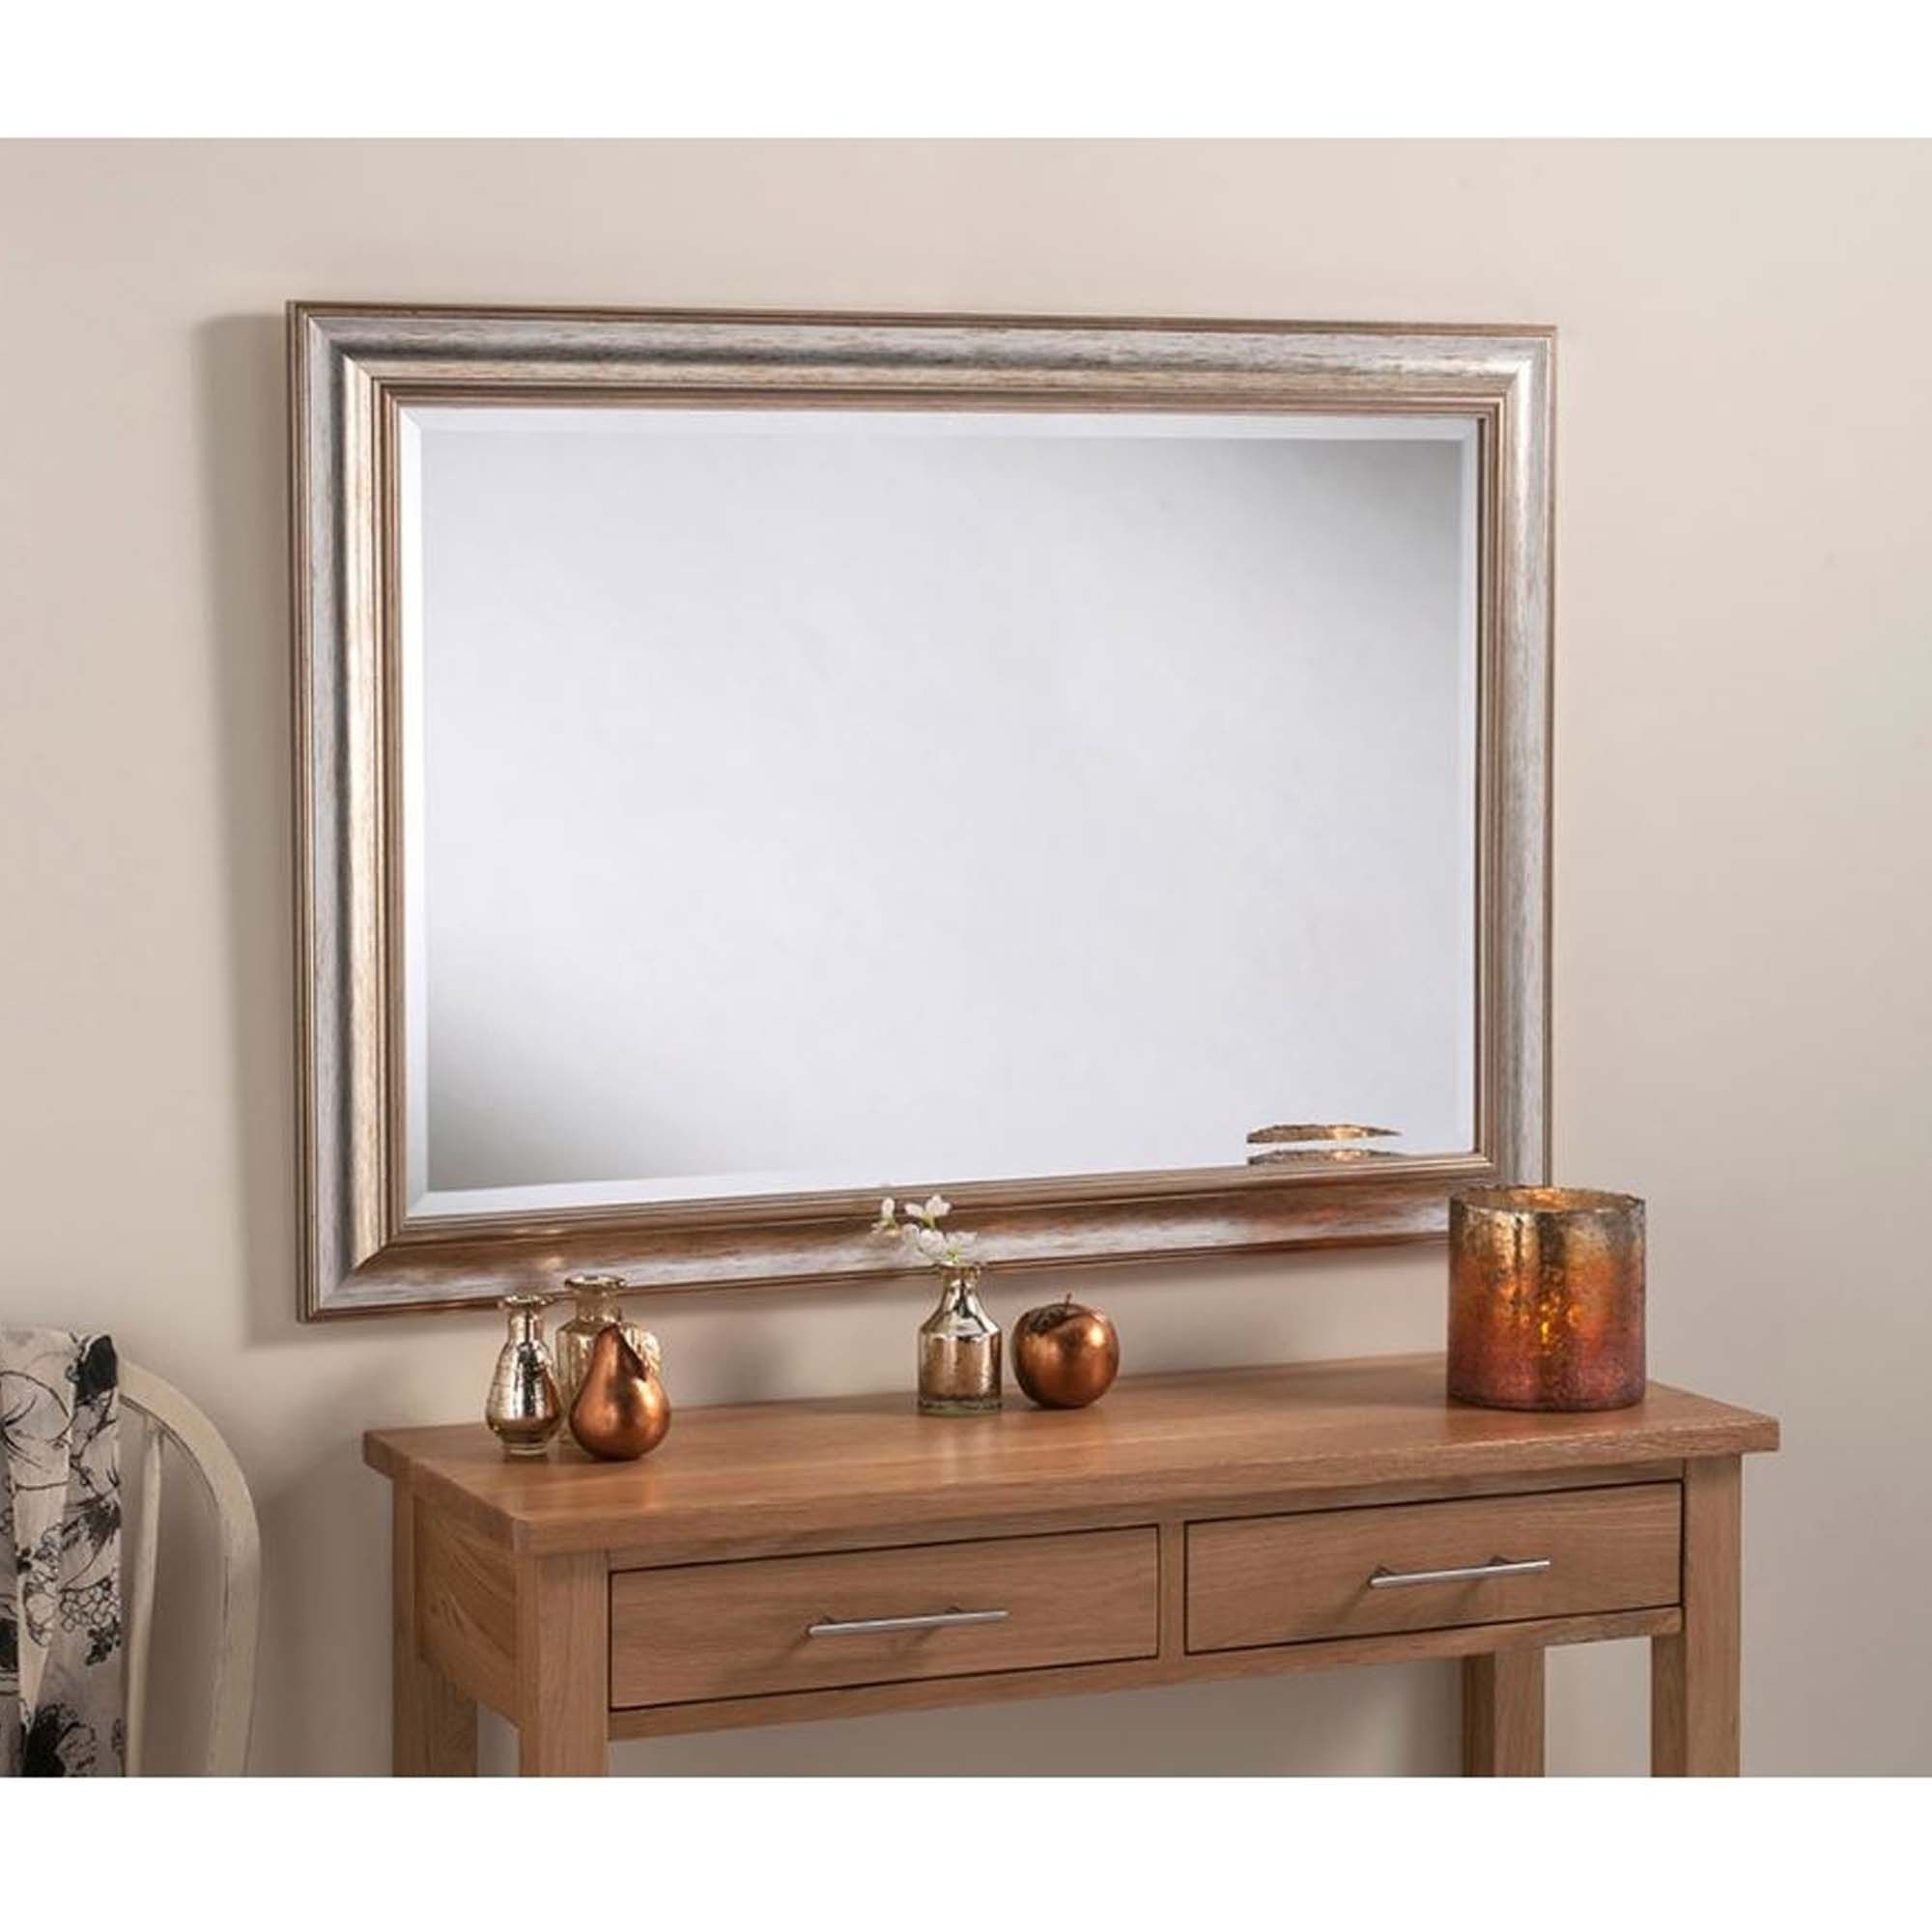 Argenta Silver Rectangular Wall Mirror | Homesdirect365 For Silver High Wall Mirrors (View 13 of 15)